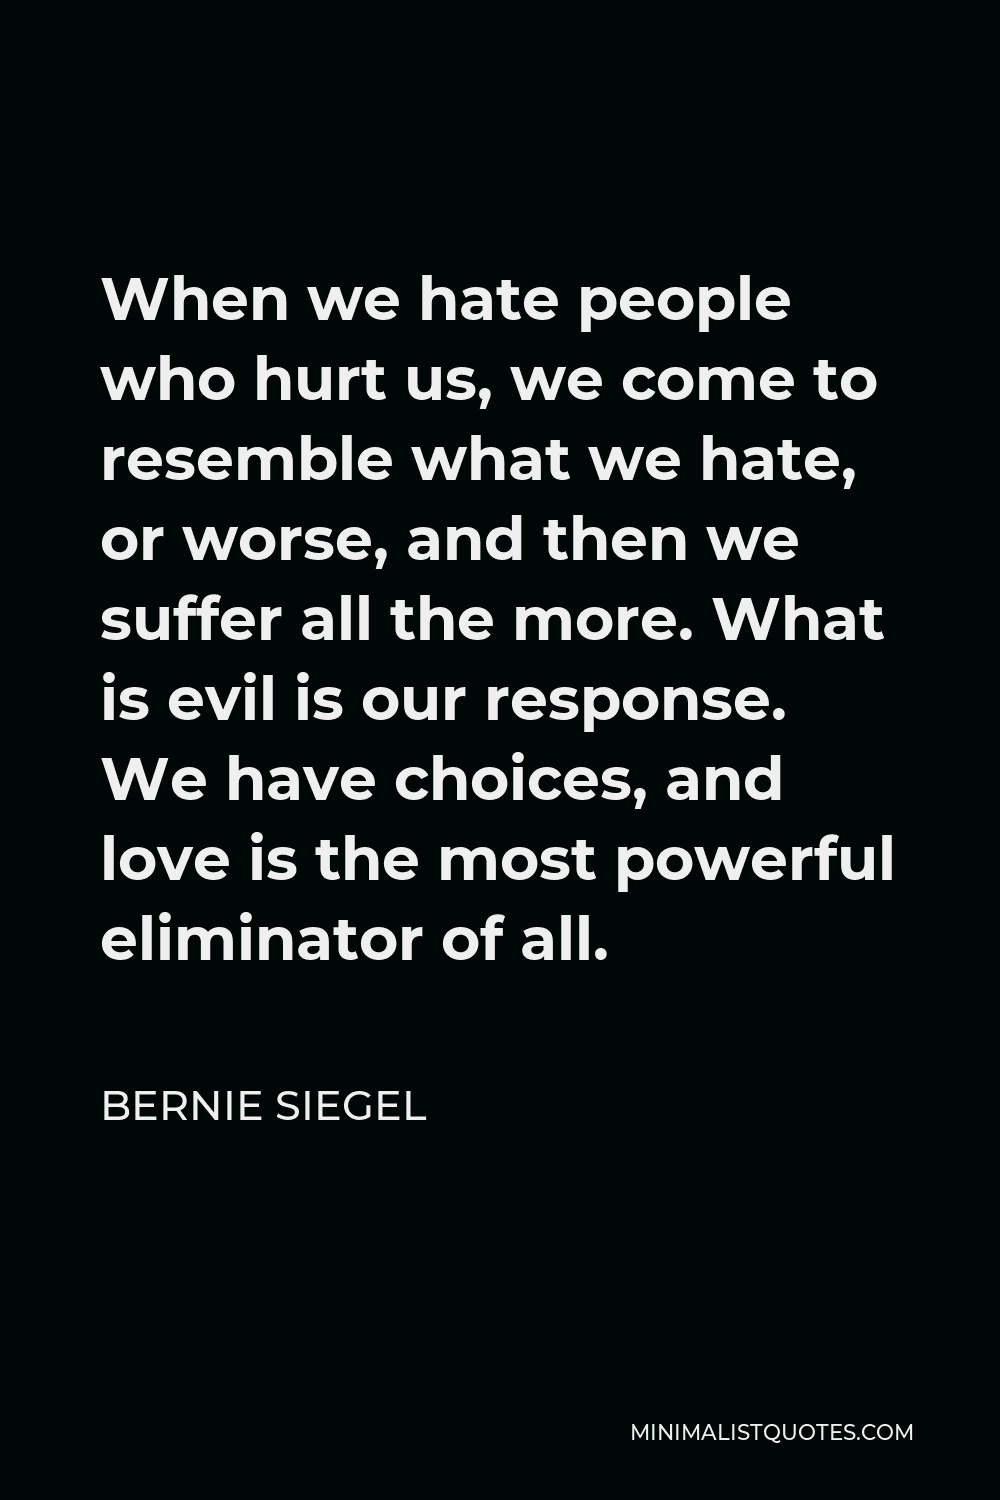 Bernie Siegel Quote - When we hate people who hurt us, we come to resemble what we hate, or worse, and then we suffer all the more. What is evil is our response. We have choices, and love is the most powerful eliminator of all.